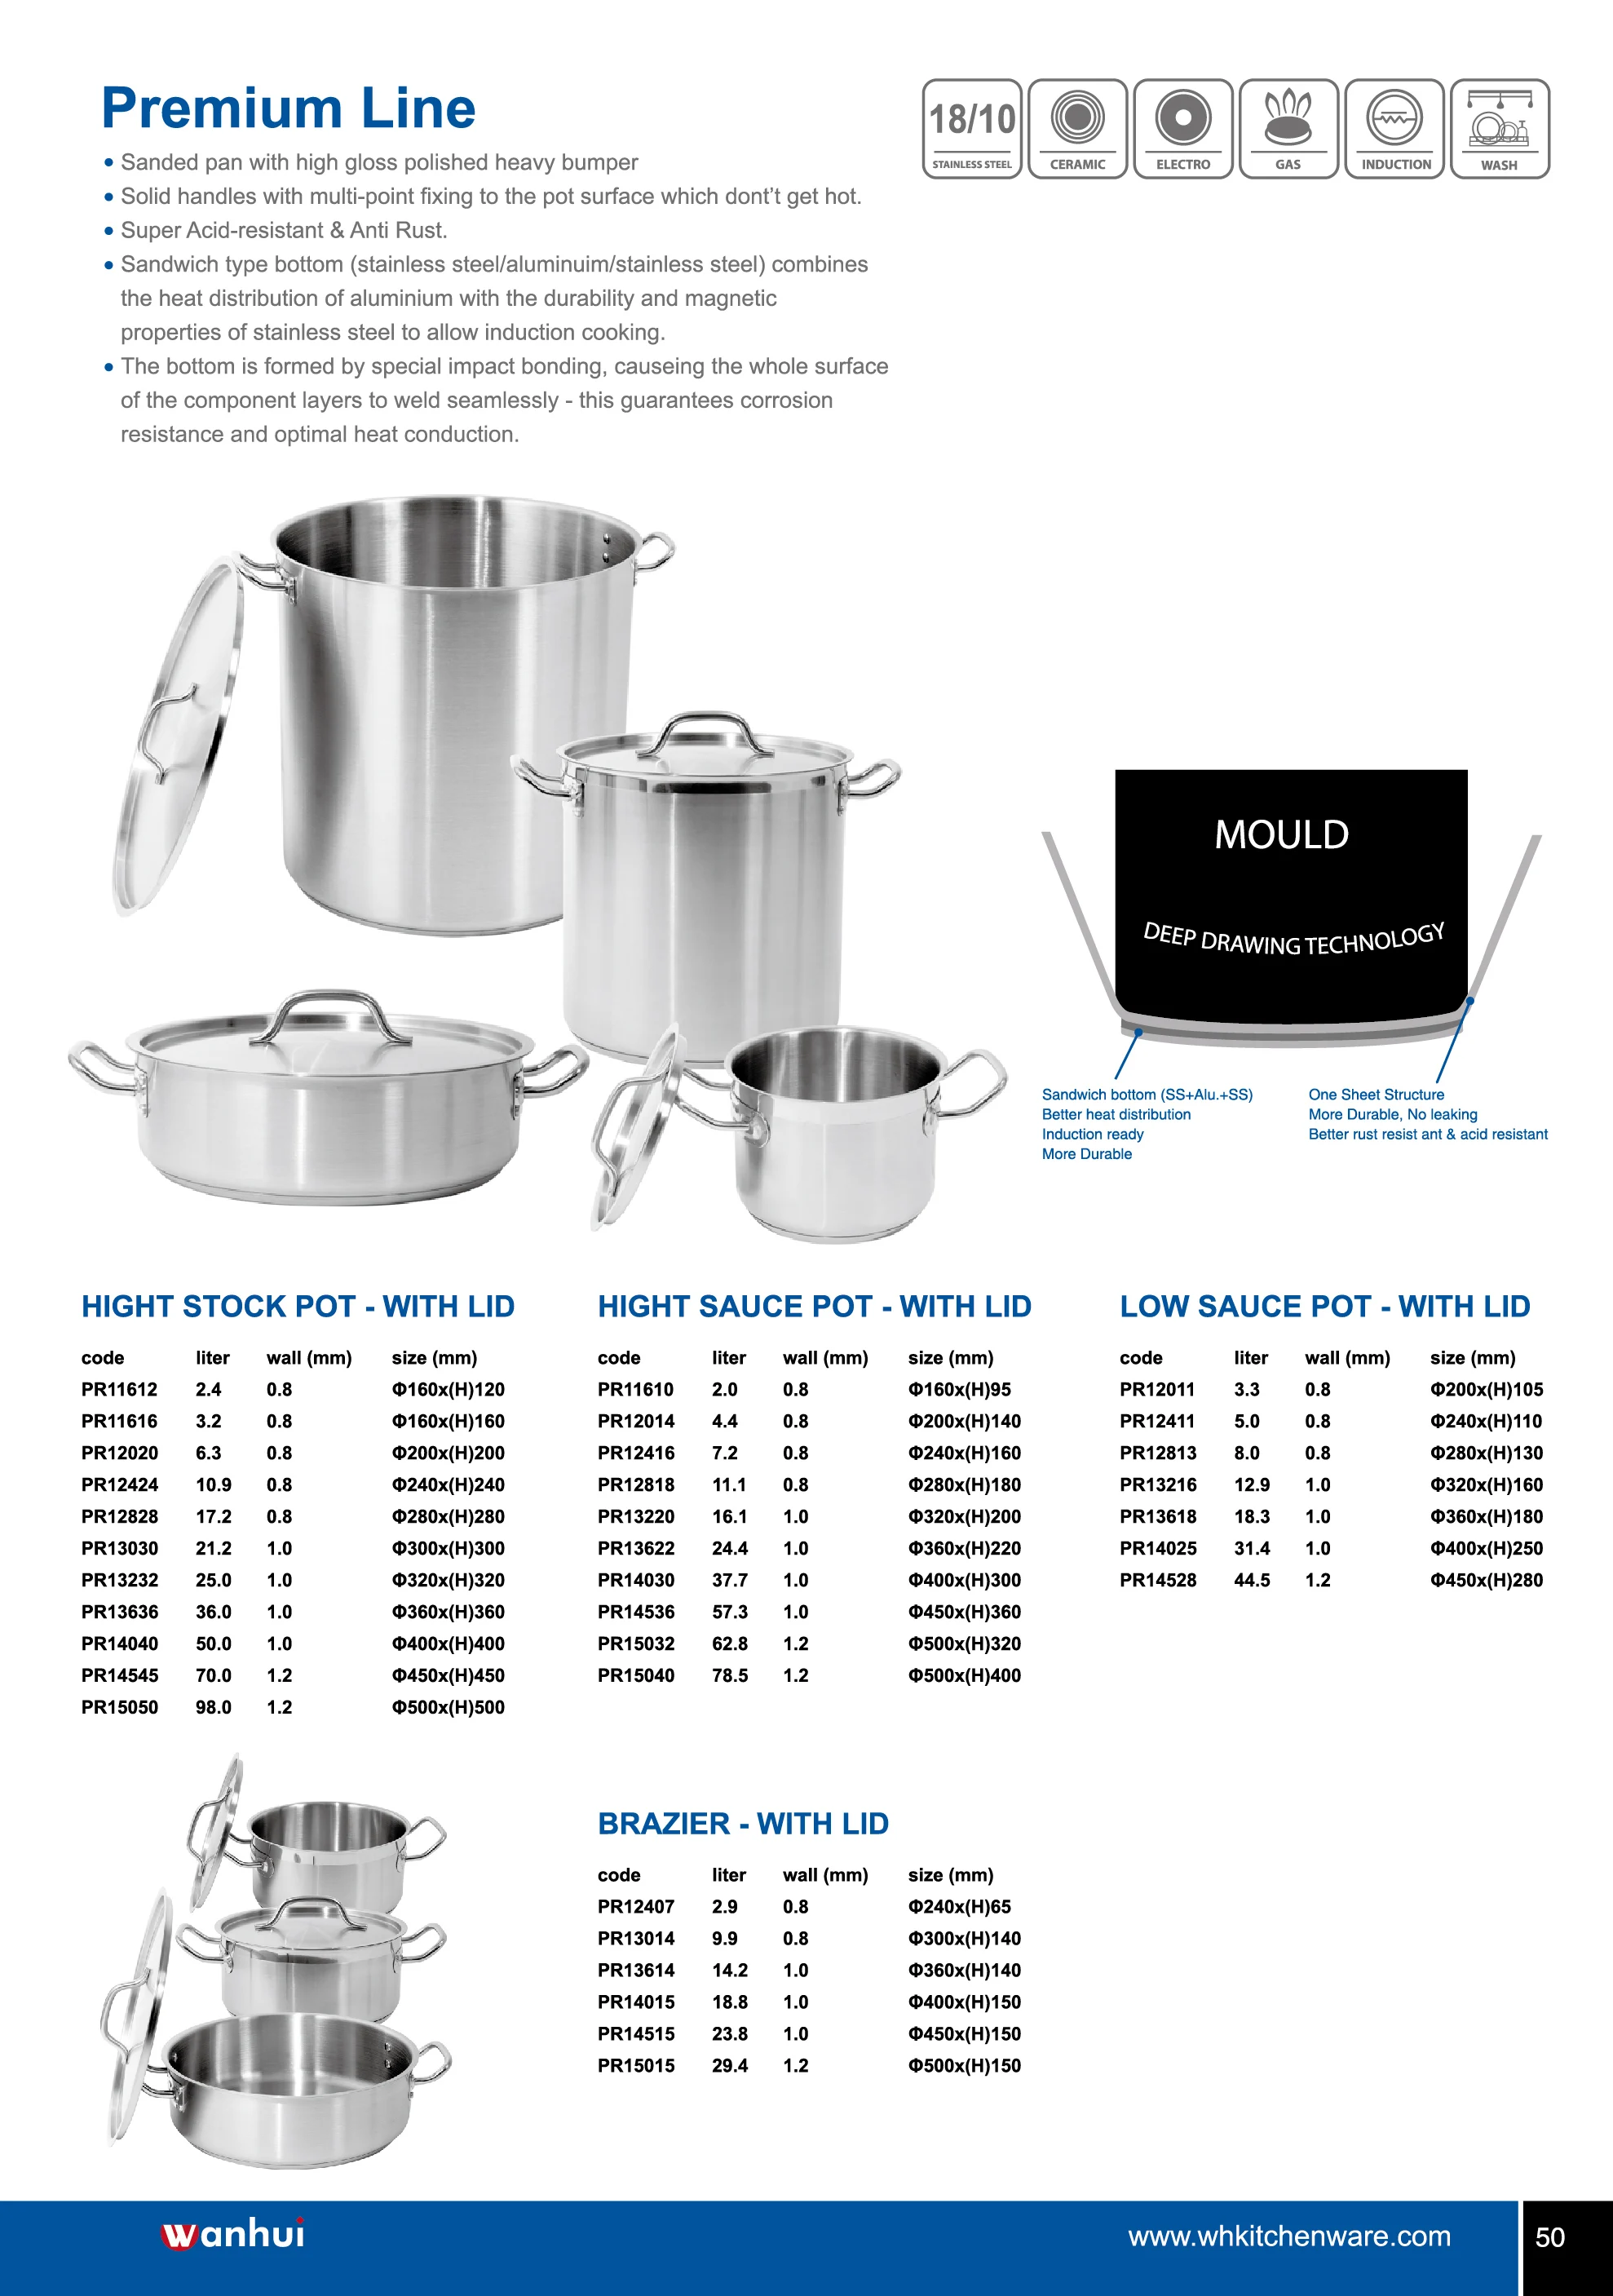 SEYFI Pots,Large Cooking Pots, Diameter 45 Cm, Height 45 Cm,Stainless  Steel,Composite Bottom Deep Stock Pot Cater Stew Soup Boiling Pan